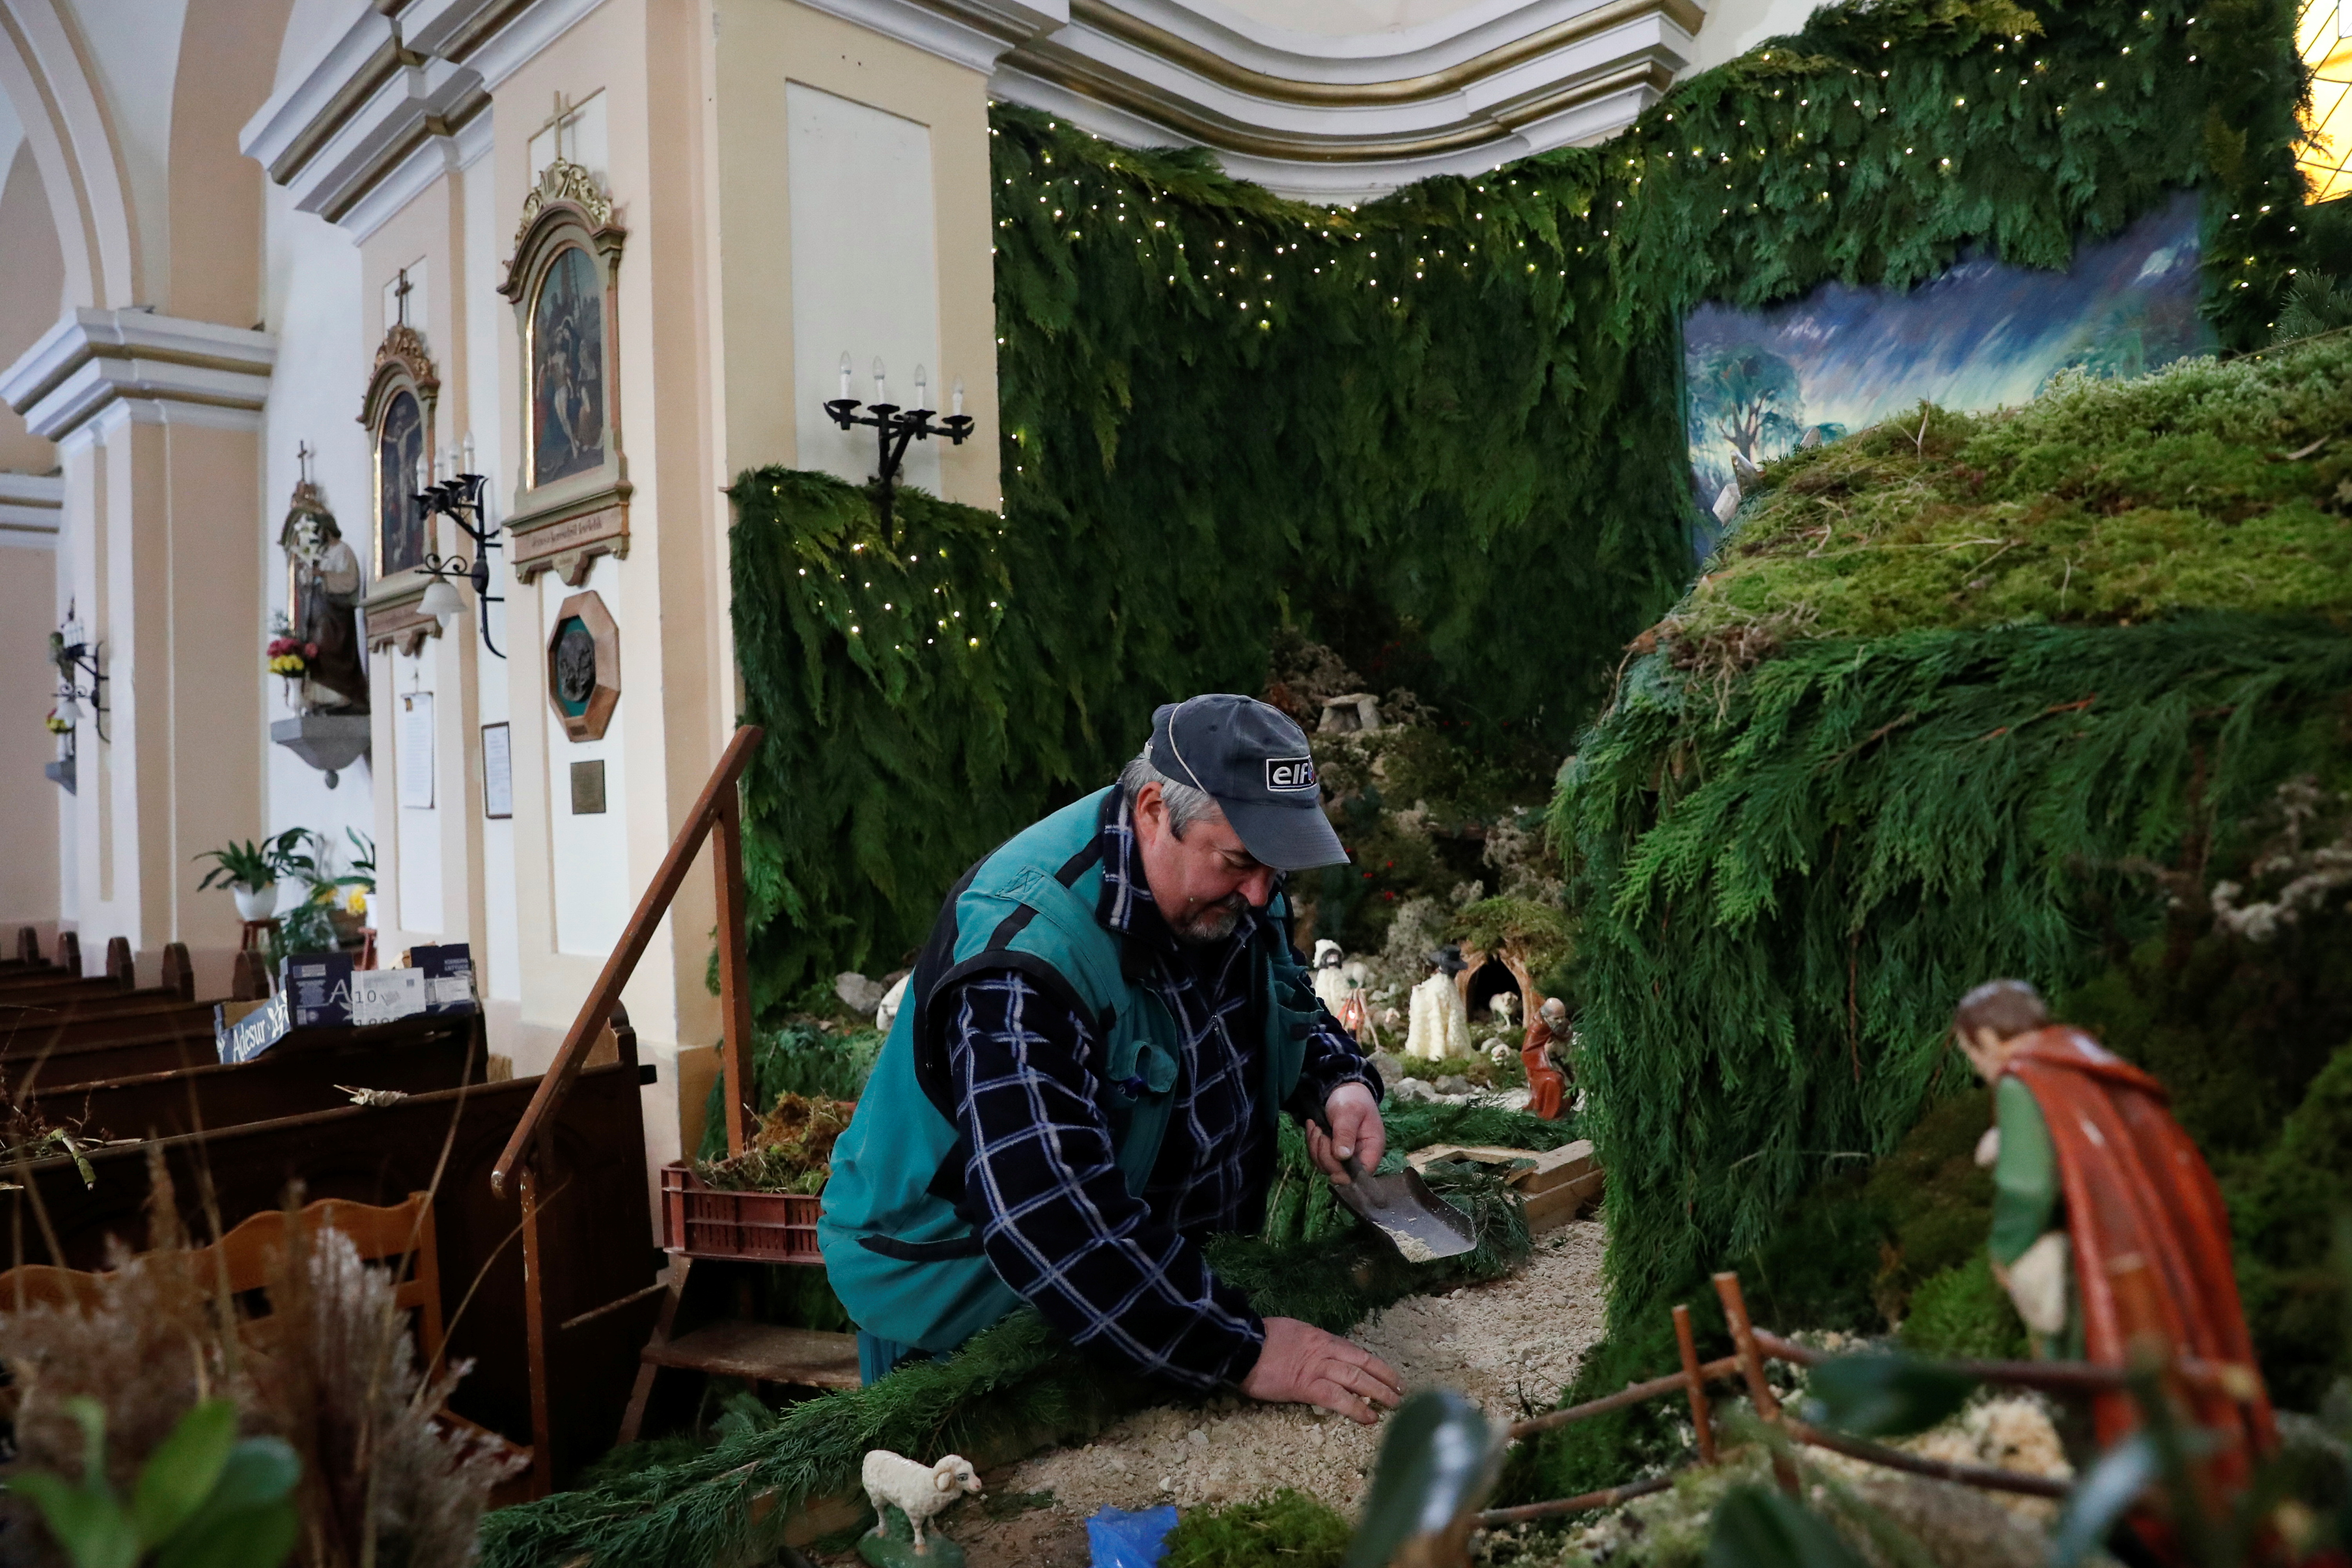 A man prepares one of Europe's largest indoor nativity scenes at the St Martin Church in Vors, Hungary, November 25, 2021. REUTERS/Bernadett Szabo